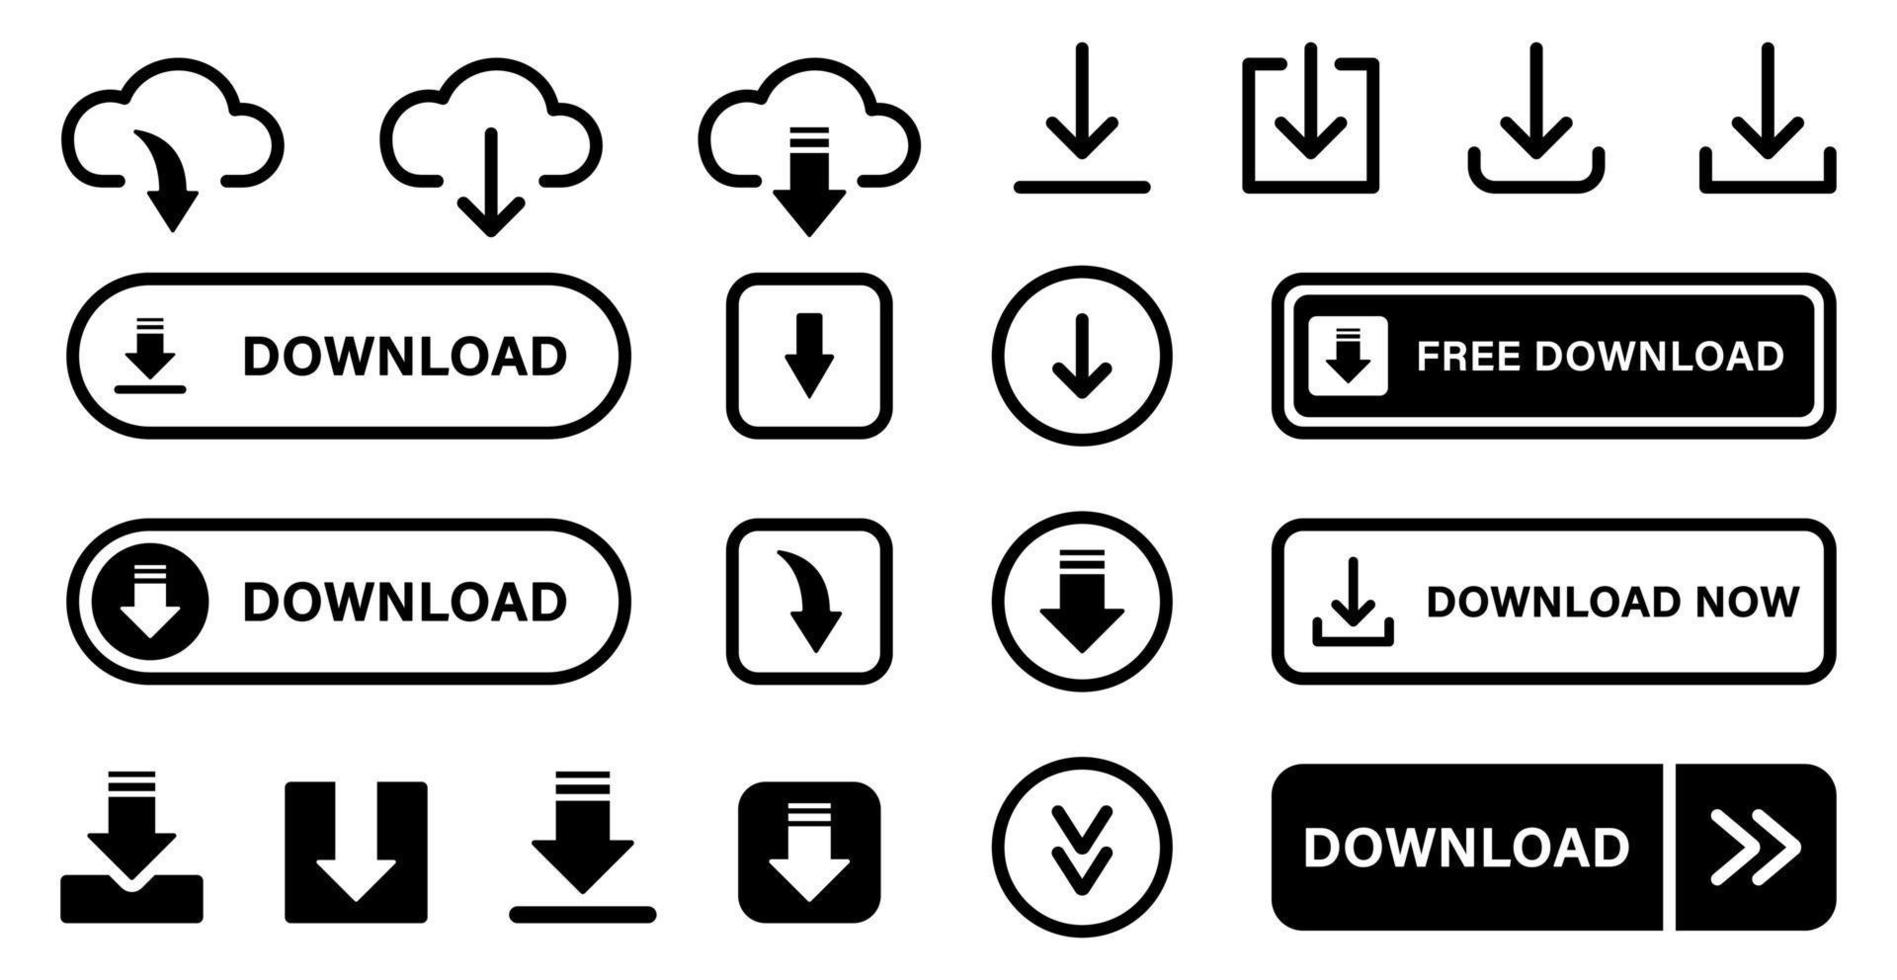 Download Button Line and Silhouette Icon Set. Down Load Web App, File, Video, Document Pictogram. Cloud, Circle, Arrow Down Upload Concept Symbol. Isolated Vector Illustration.